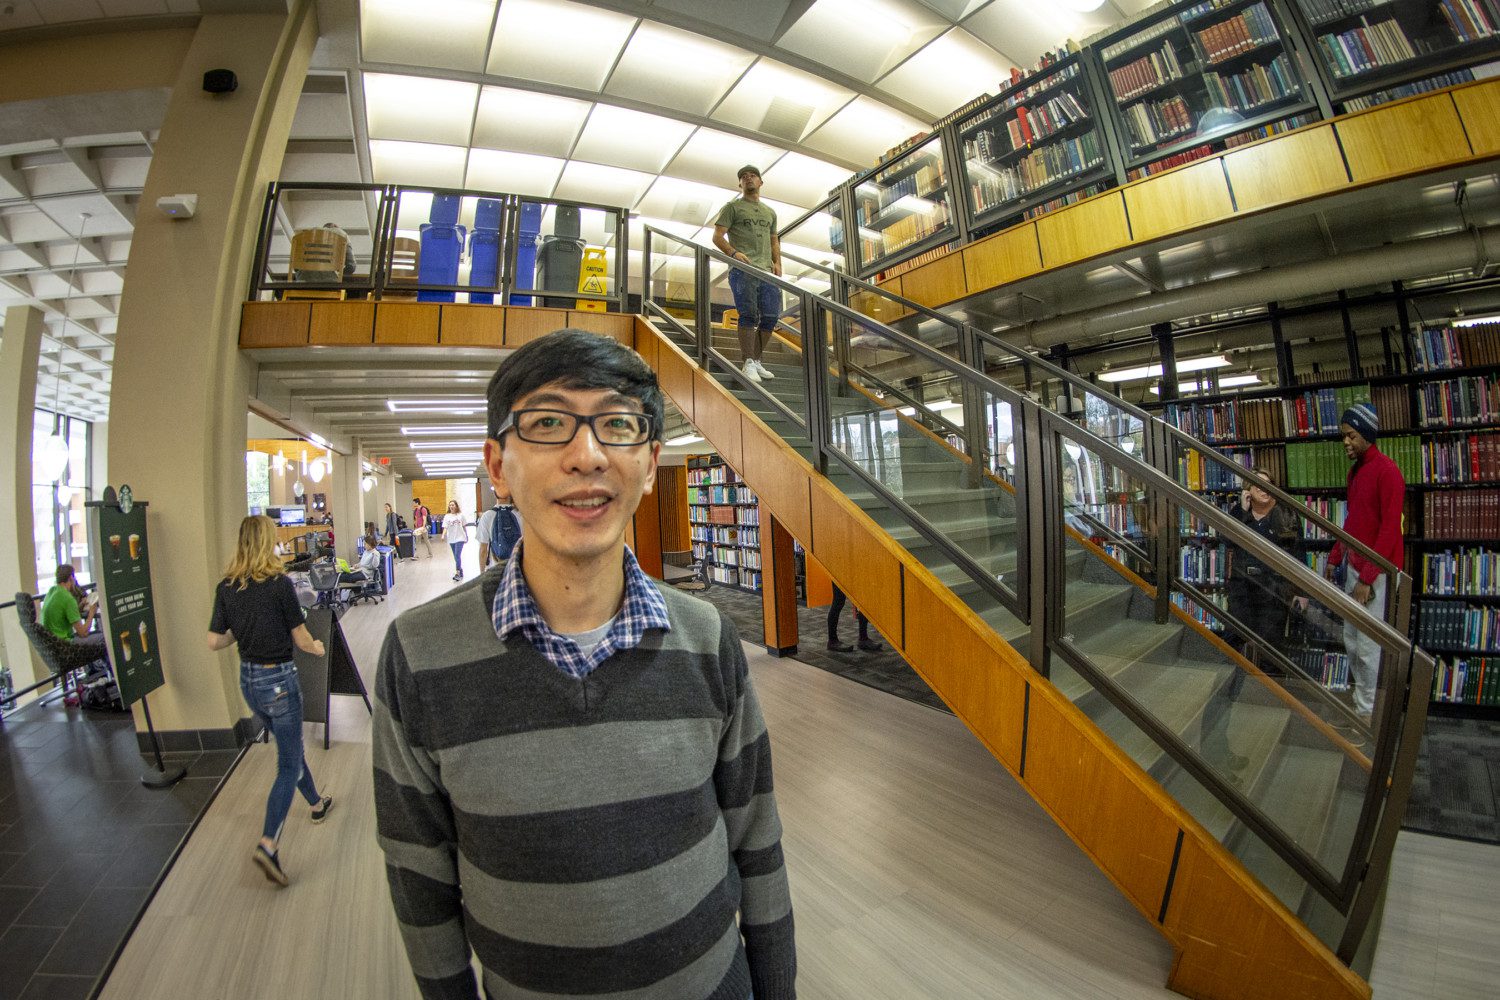 A man with a striped sweater and glasses stands in the library, with book cases and a stair case next to him and students walking around behind him.